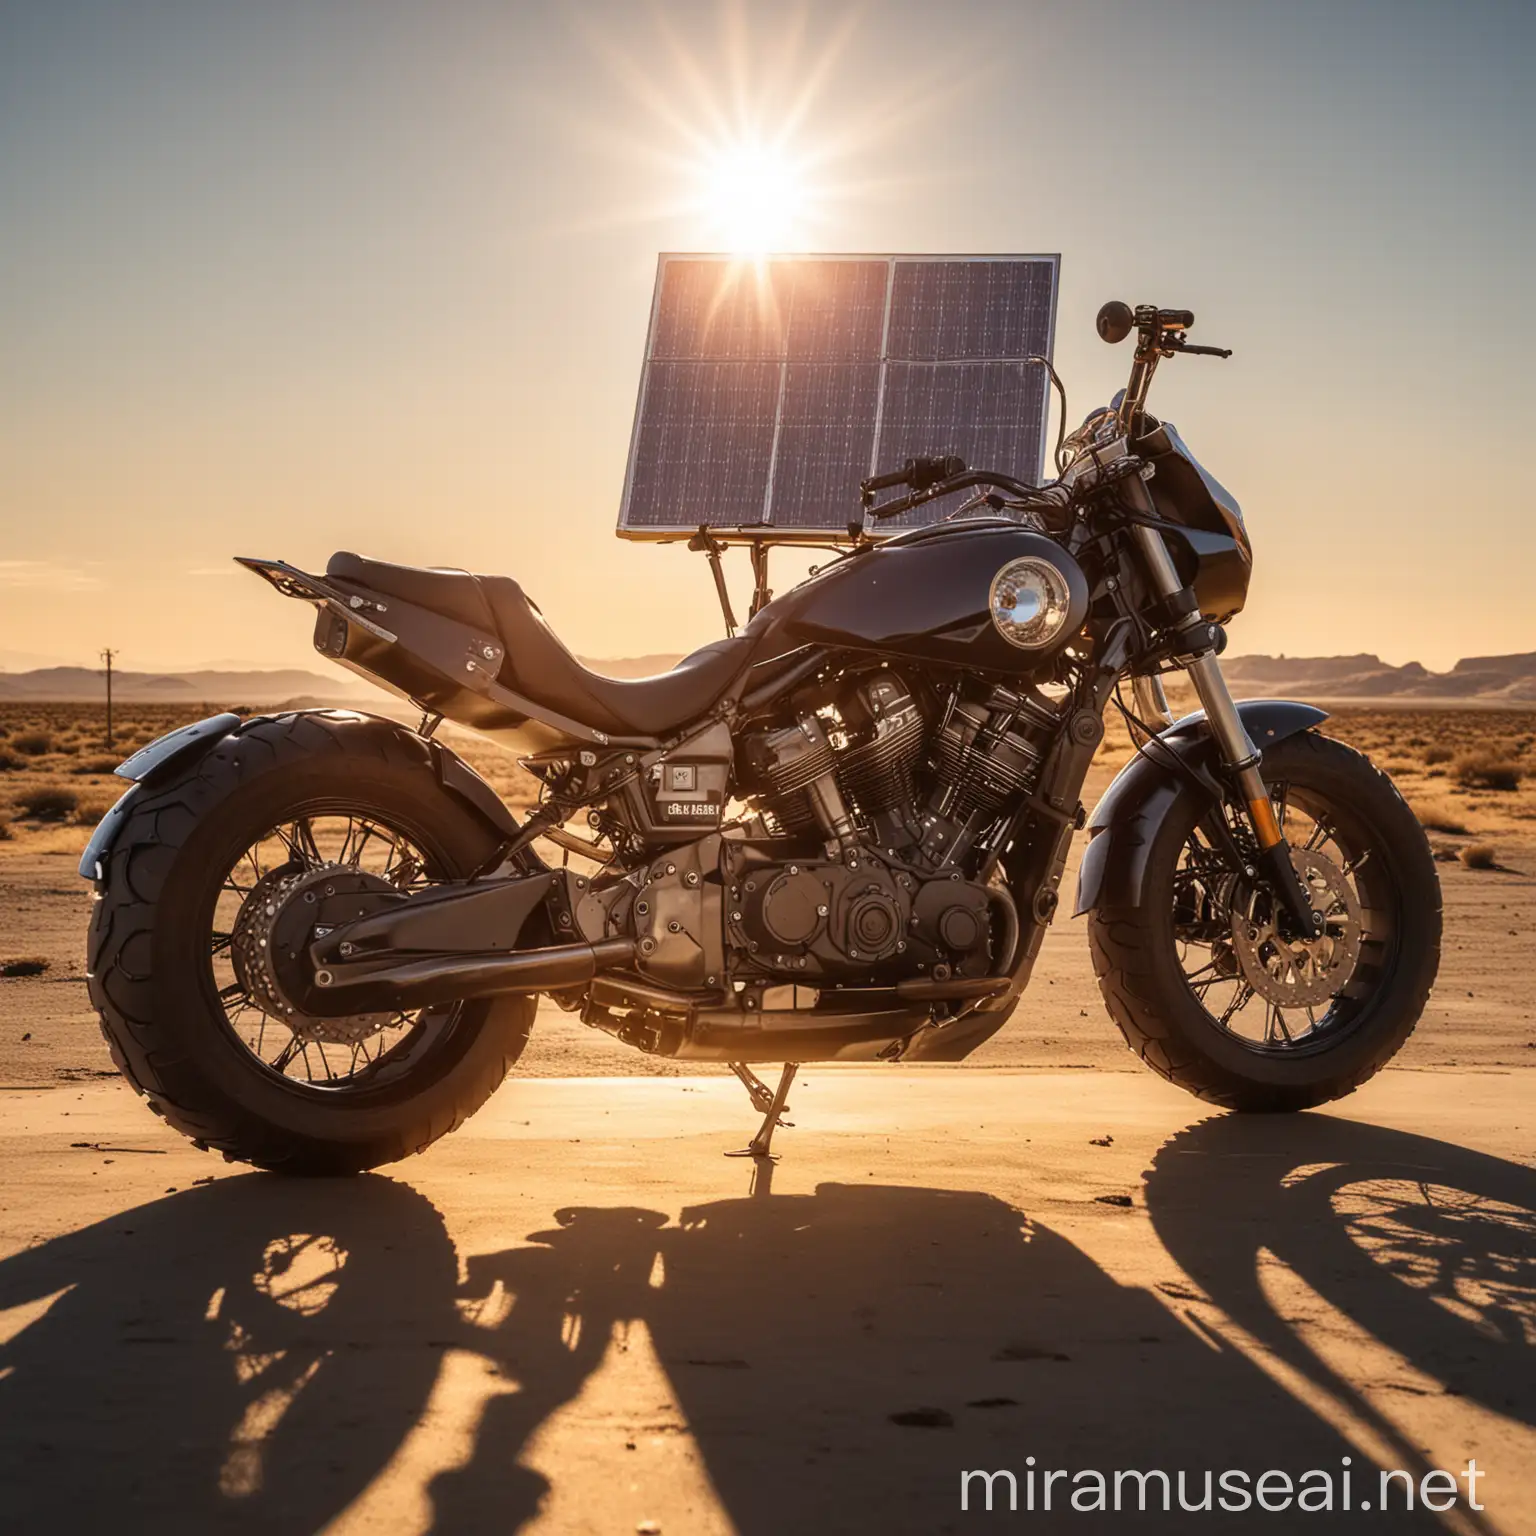 large motorcycle with solar panel and large sun behind